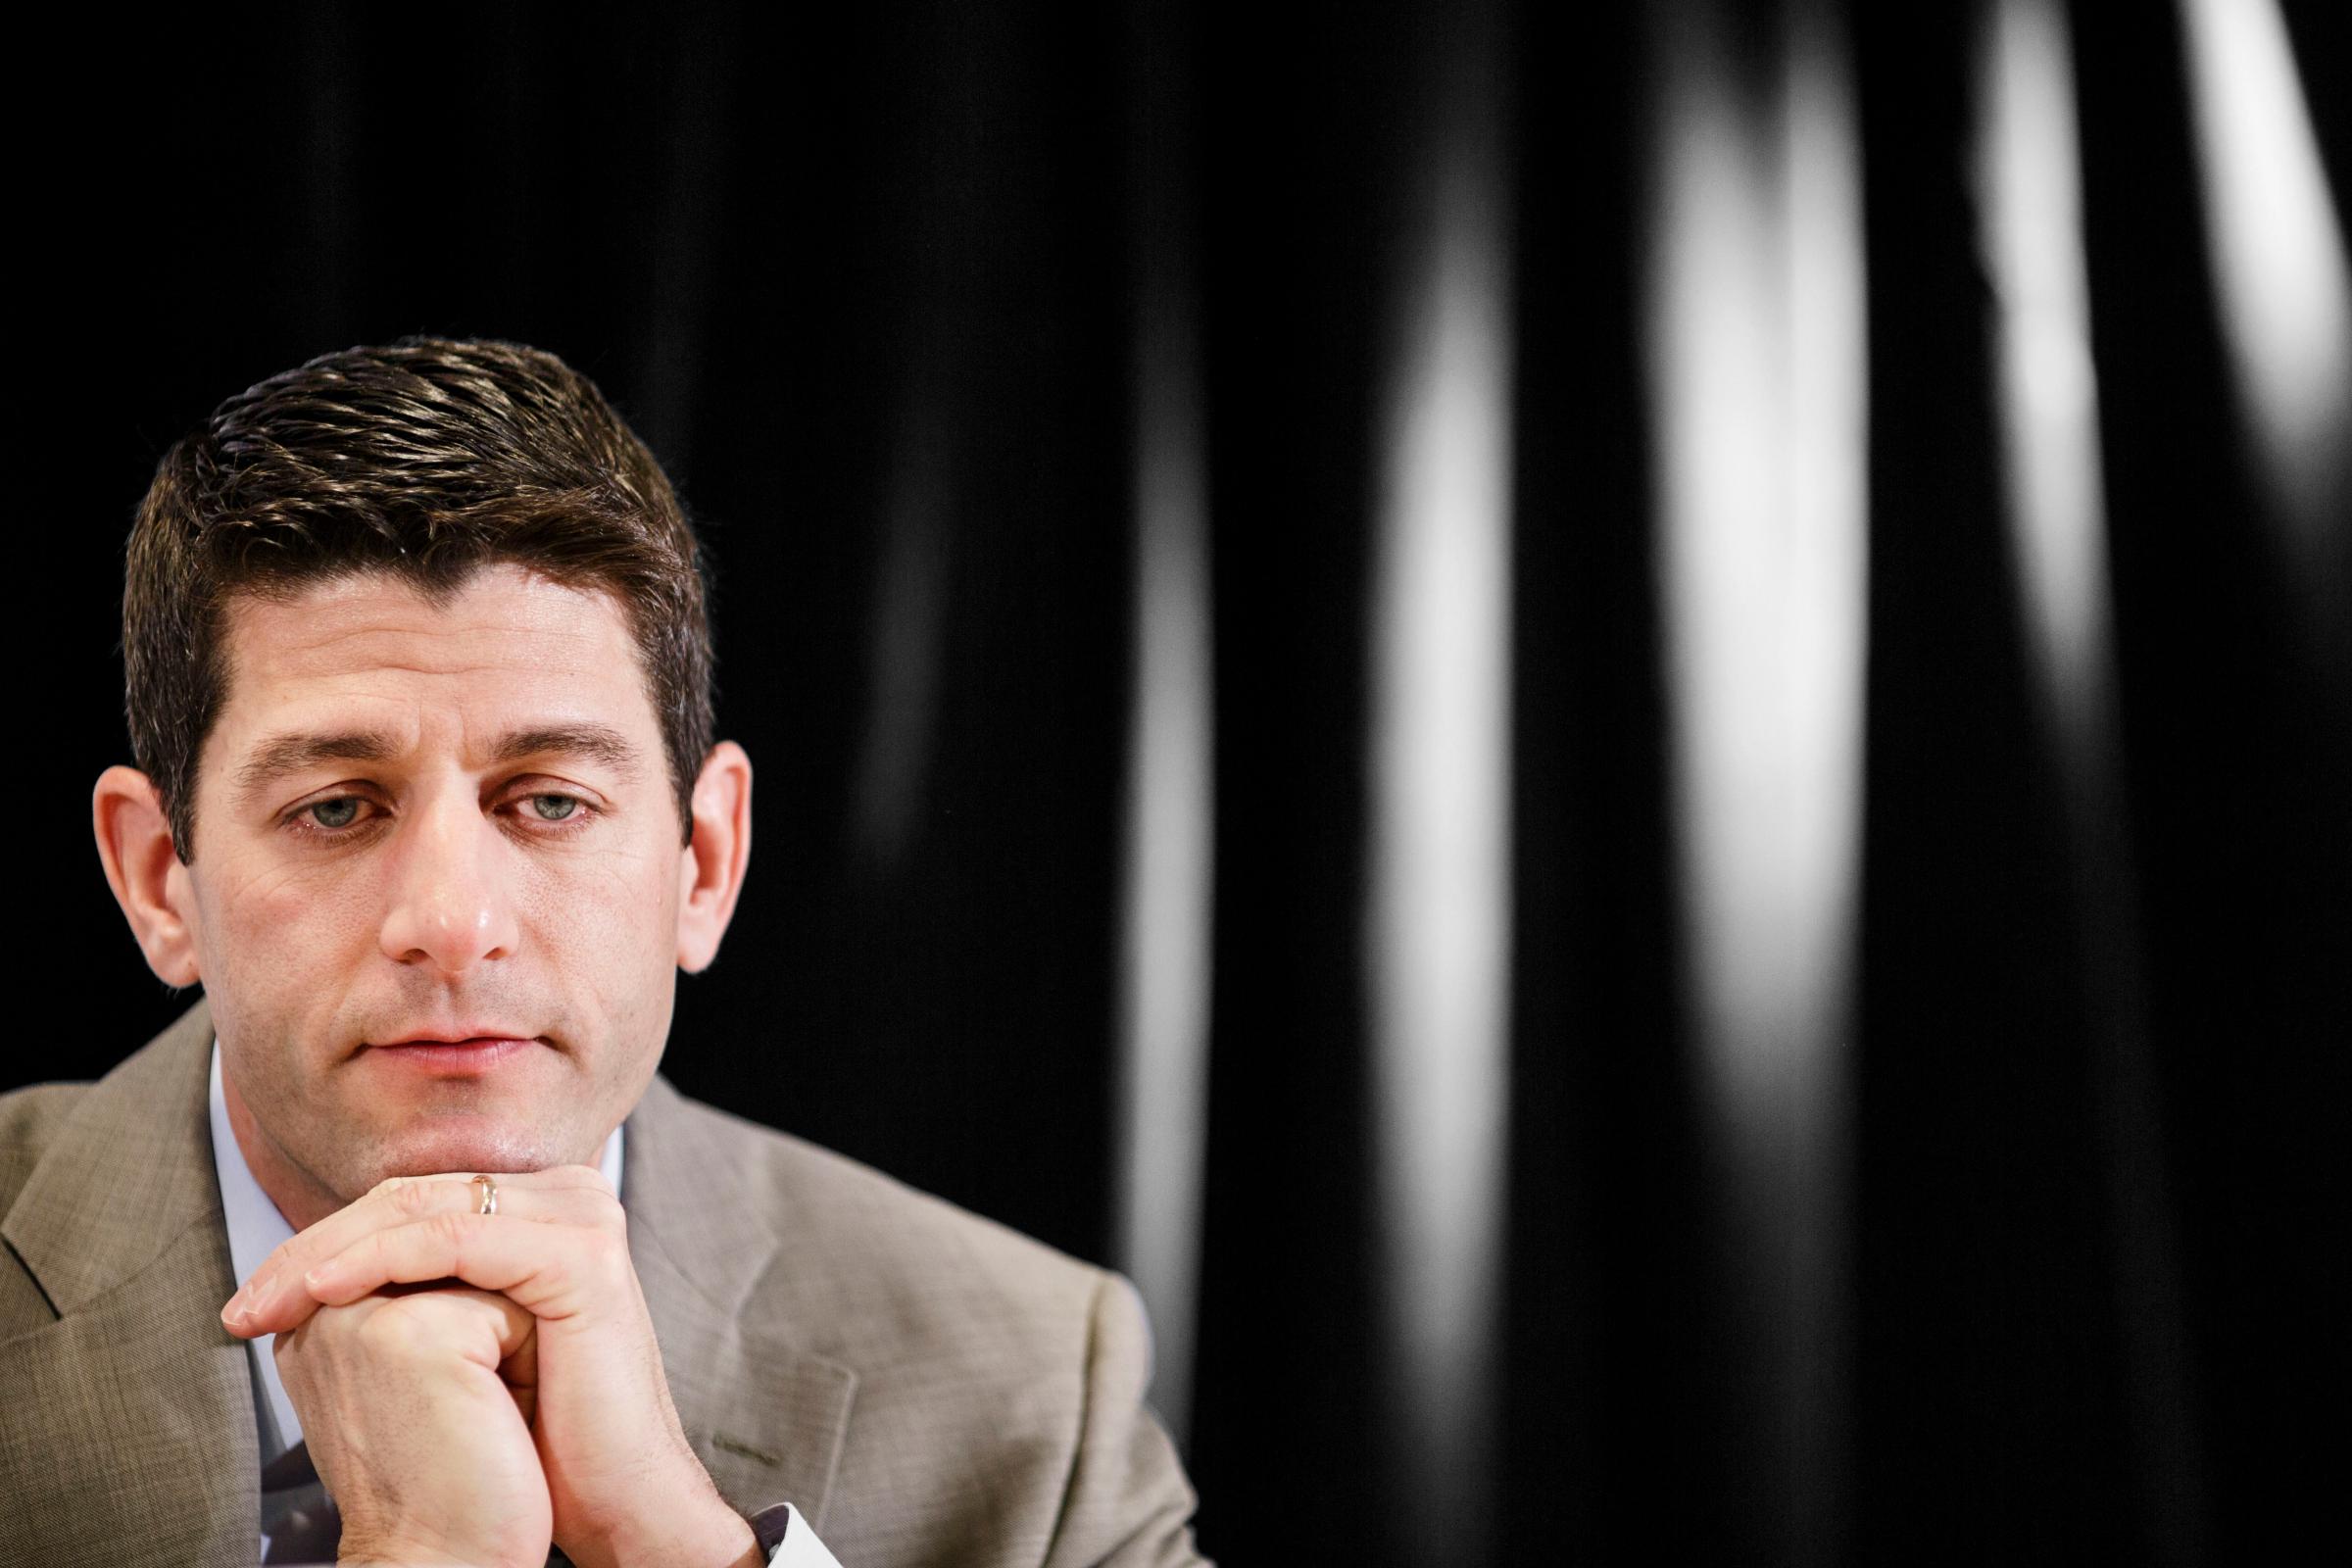 Paul Ryan The new Speaker of the House never wanted this job, but he's already proven to be quite canny in how he got it. One of the few figures who can bring together conservatives and the Establishment, but it remains to be seen how long his honeymoon will last.